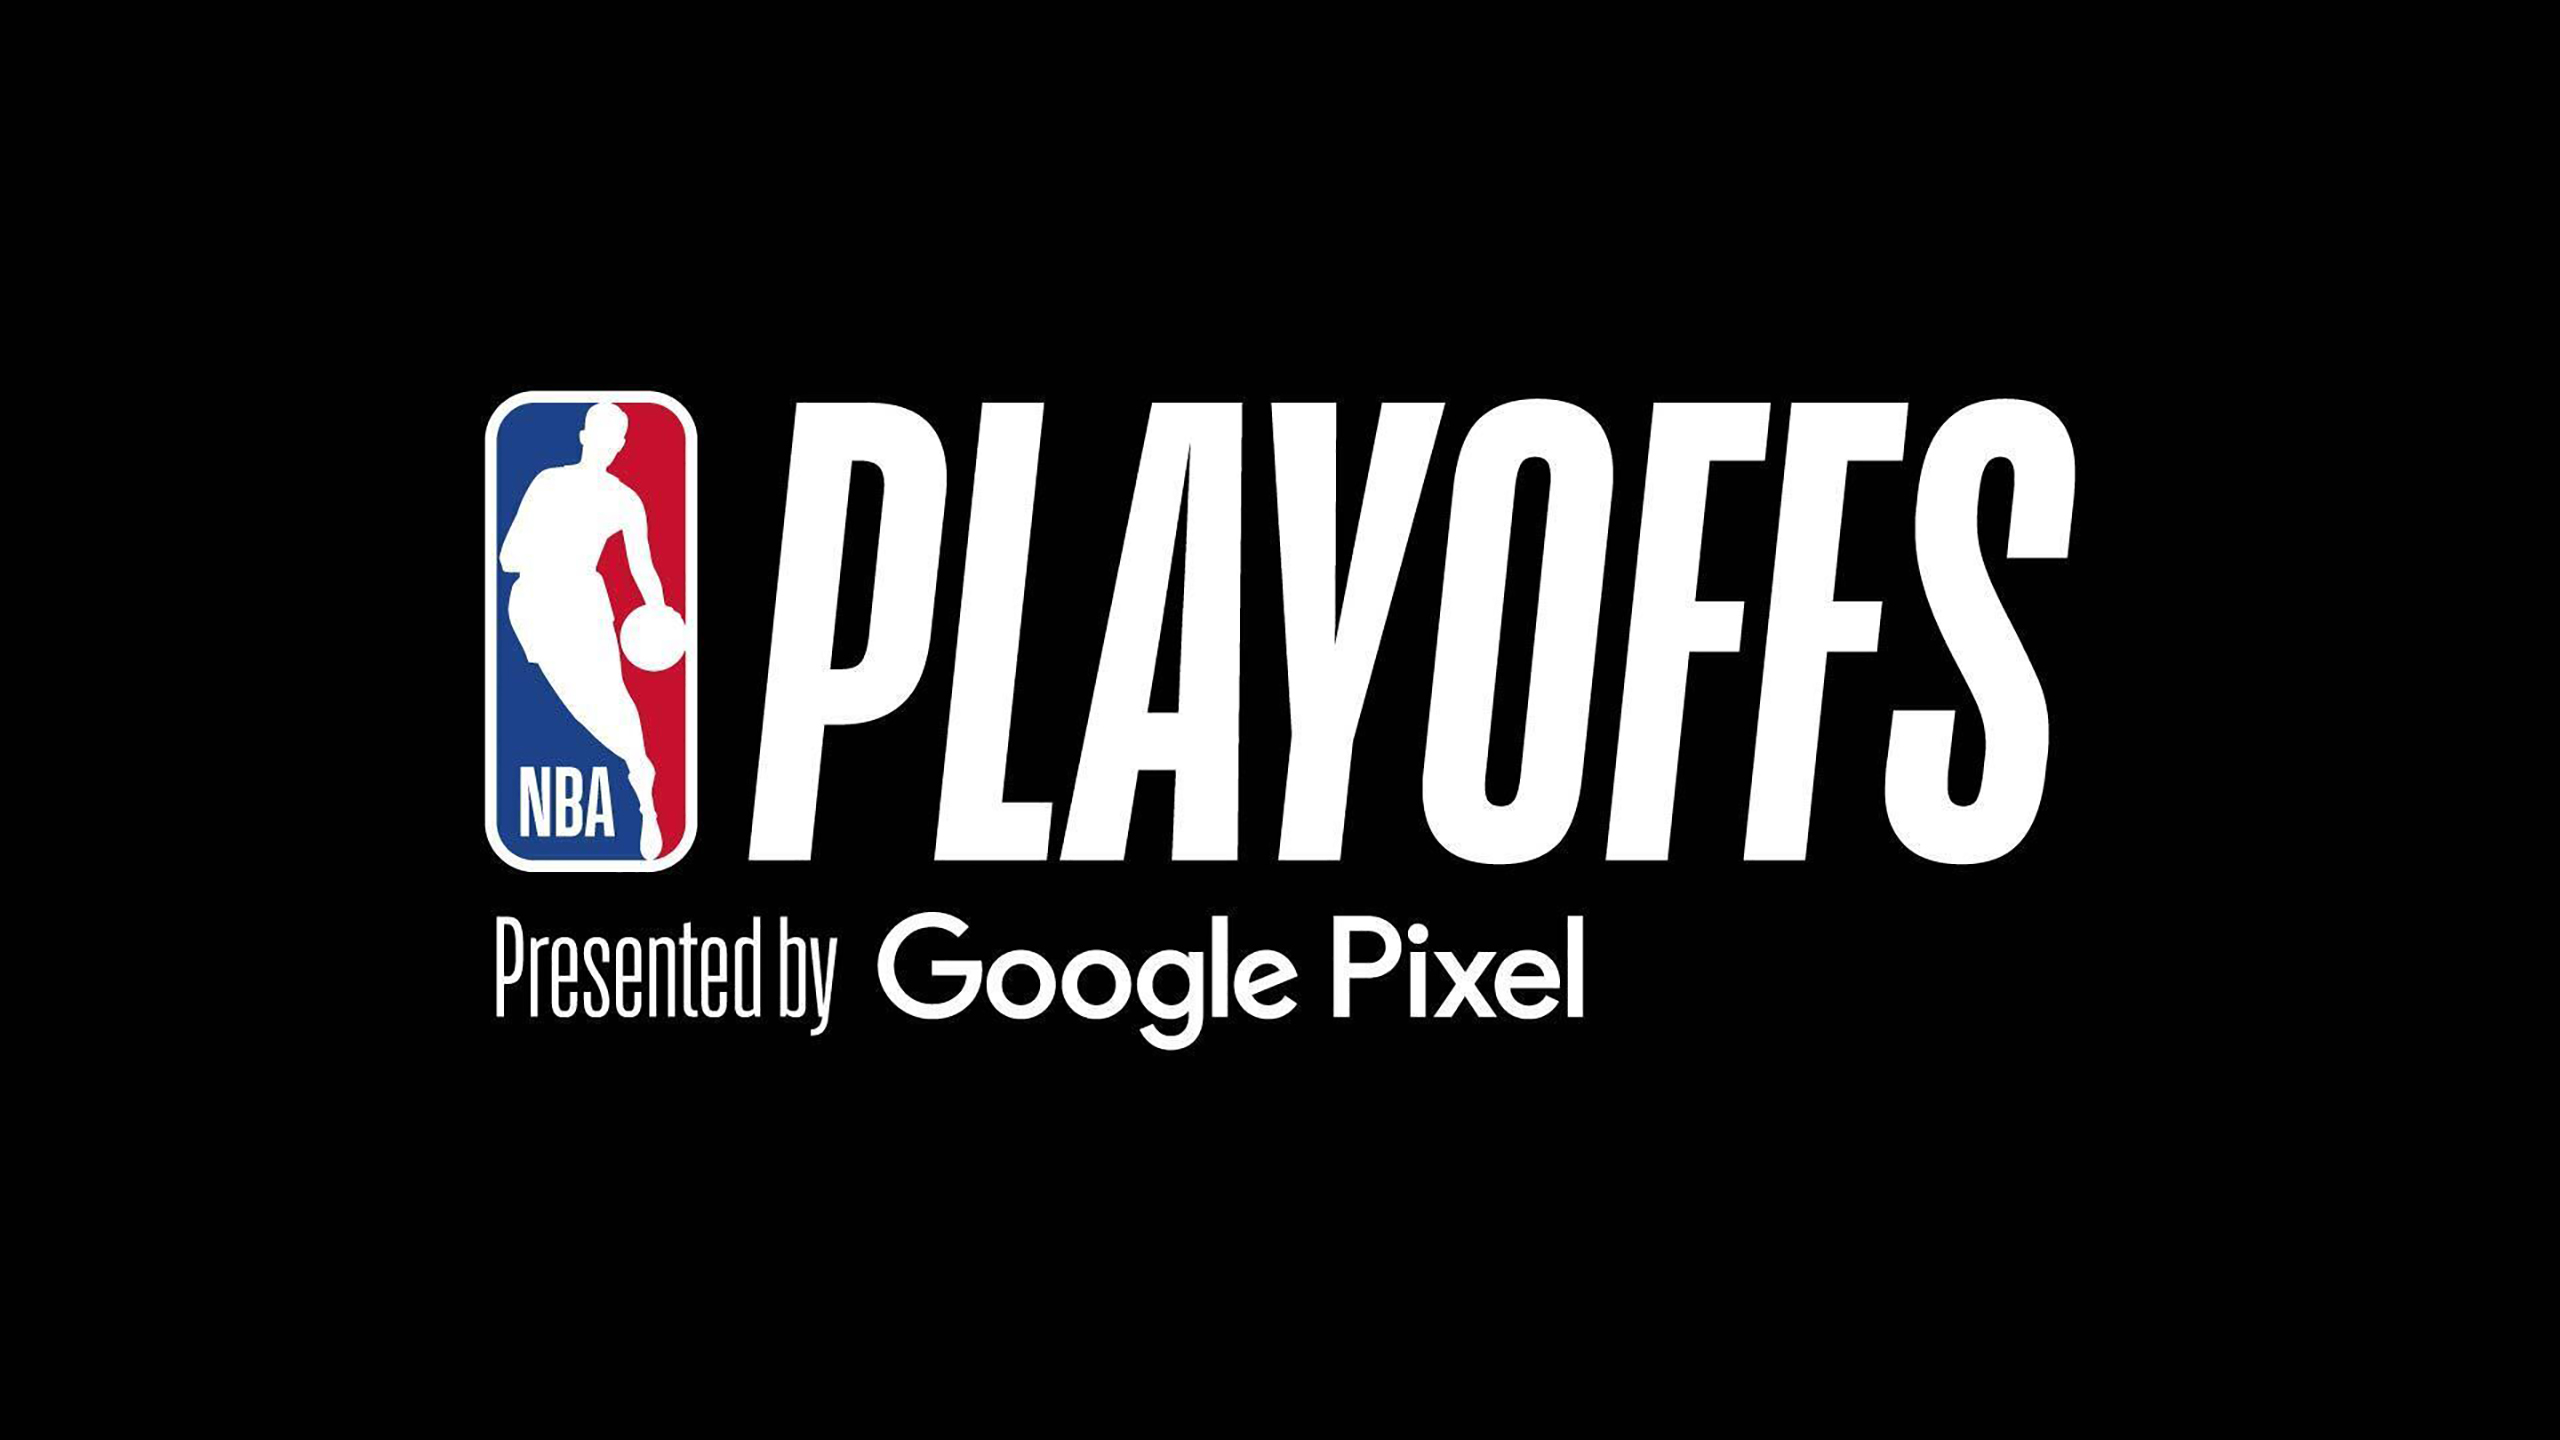 How to Watch the NBA Playoffs on DISH